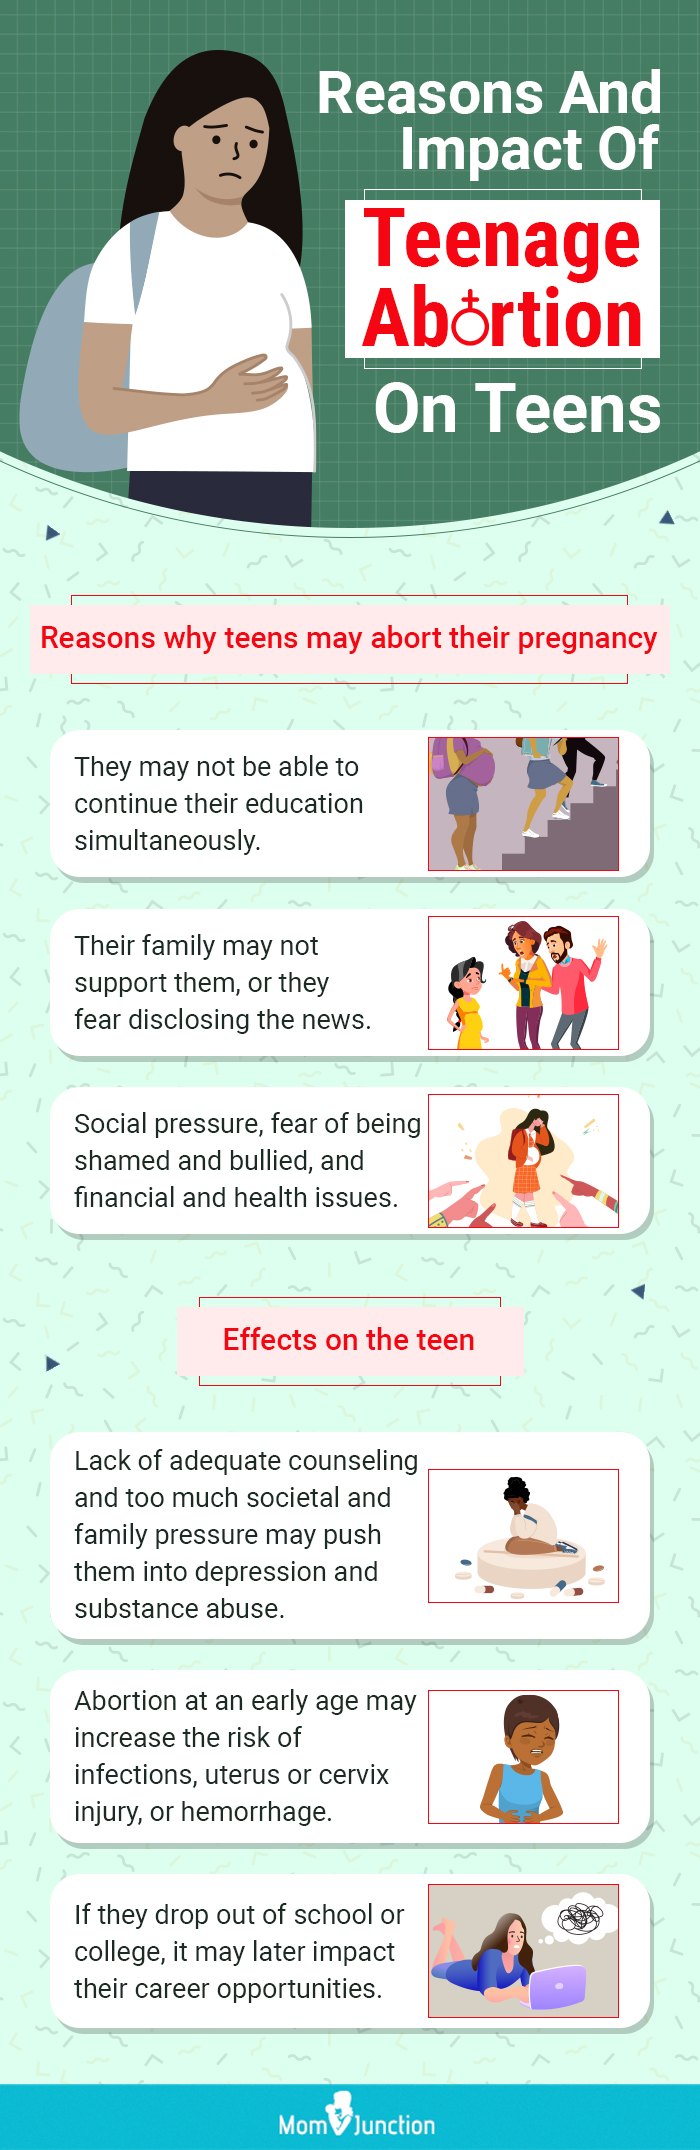 reasons and impact of teenage abortion on teens (infographic)